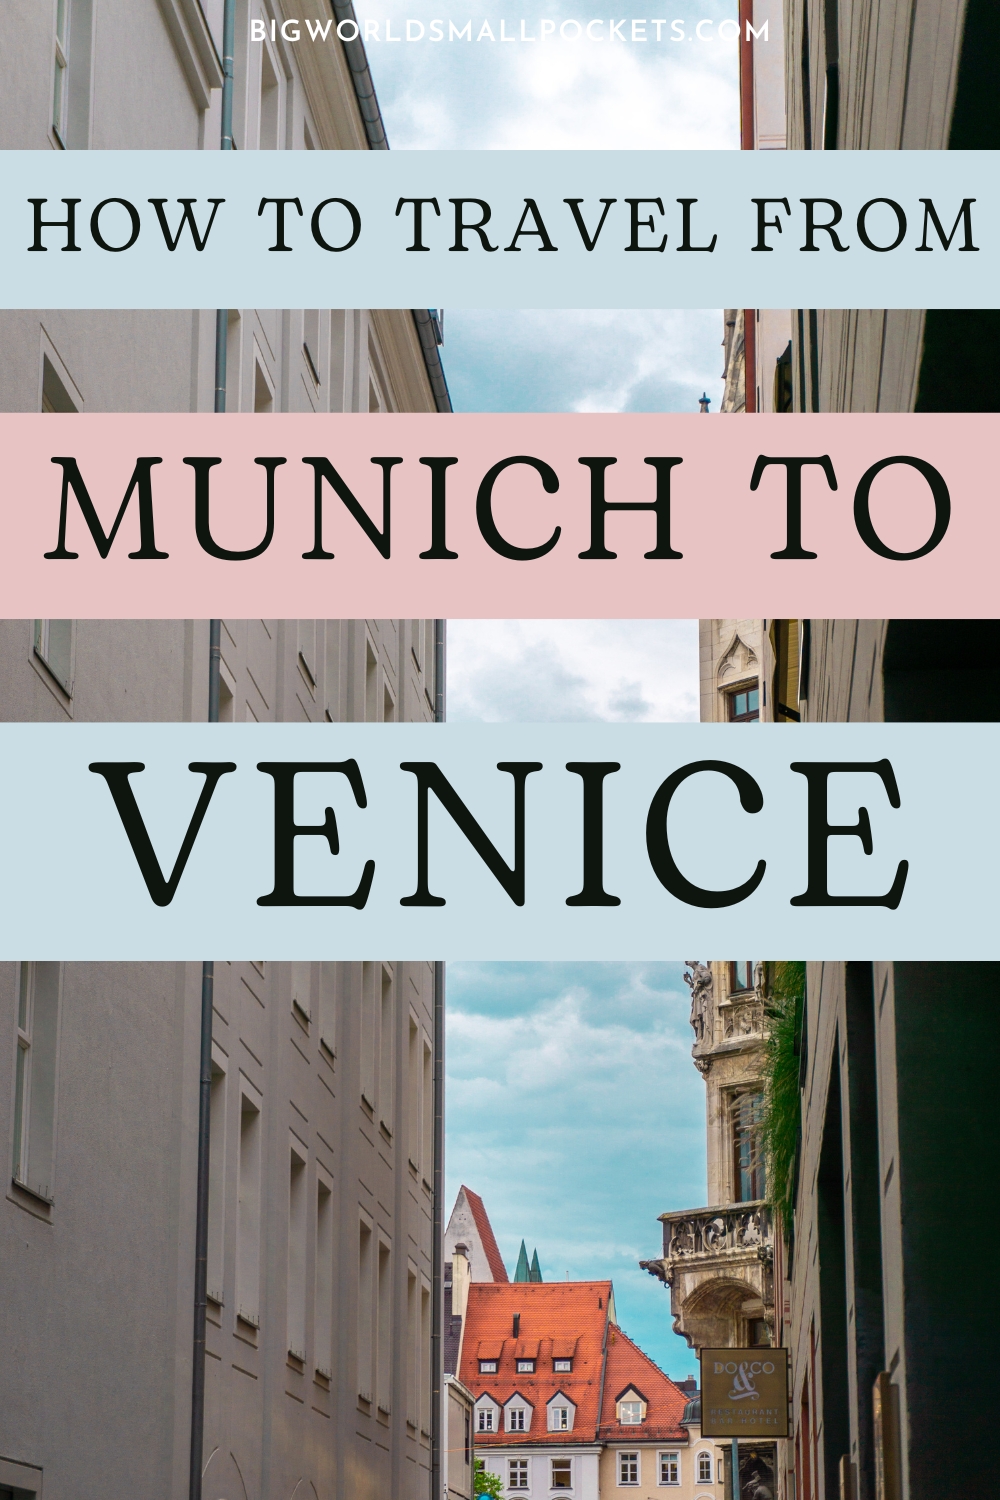 How Best to Travel from Munich to Venice